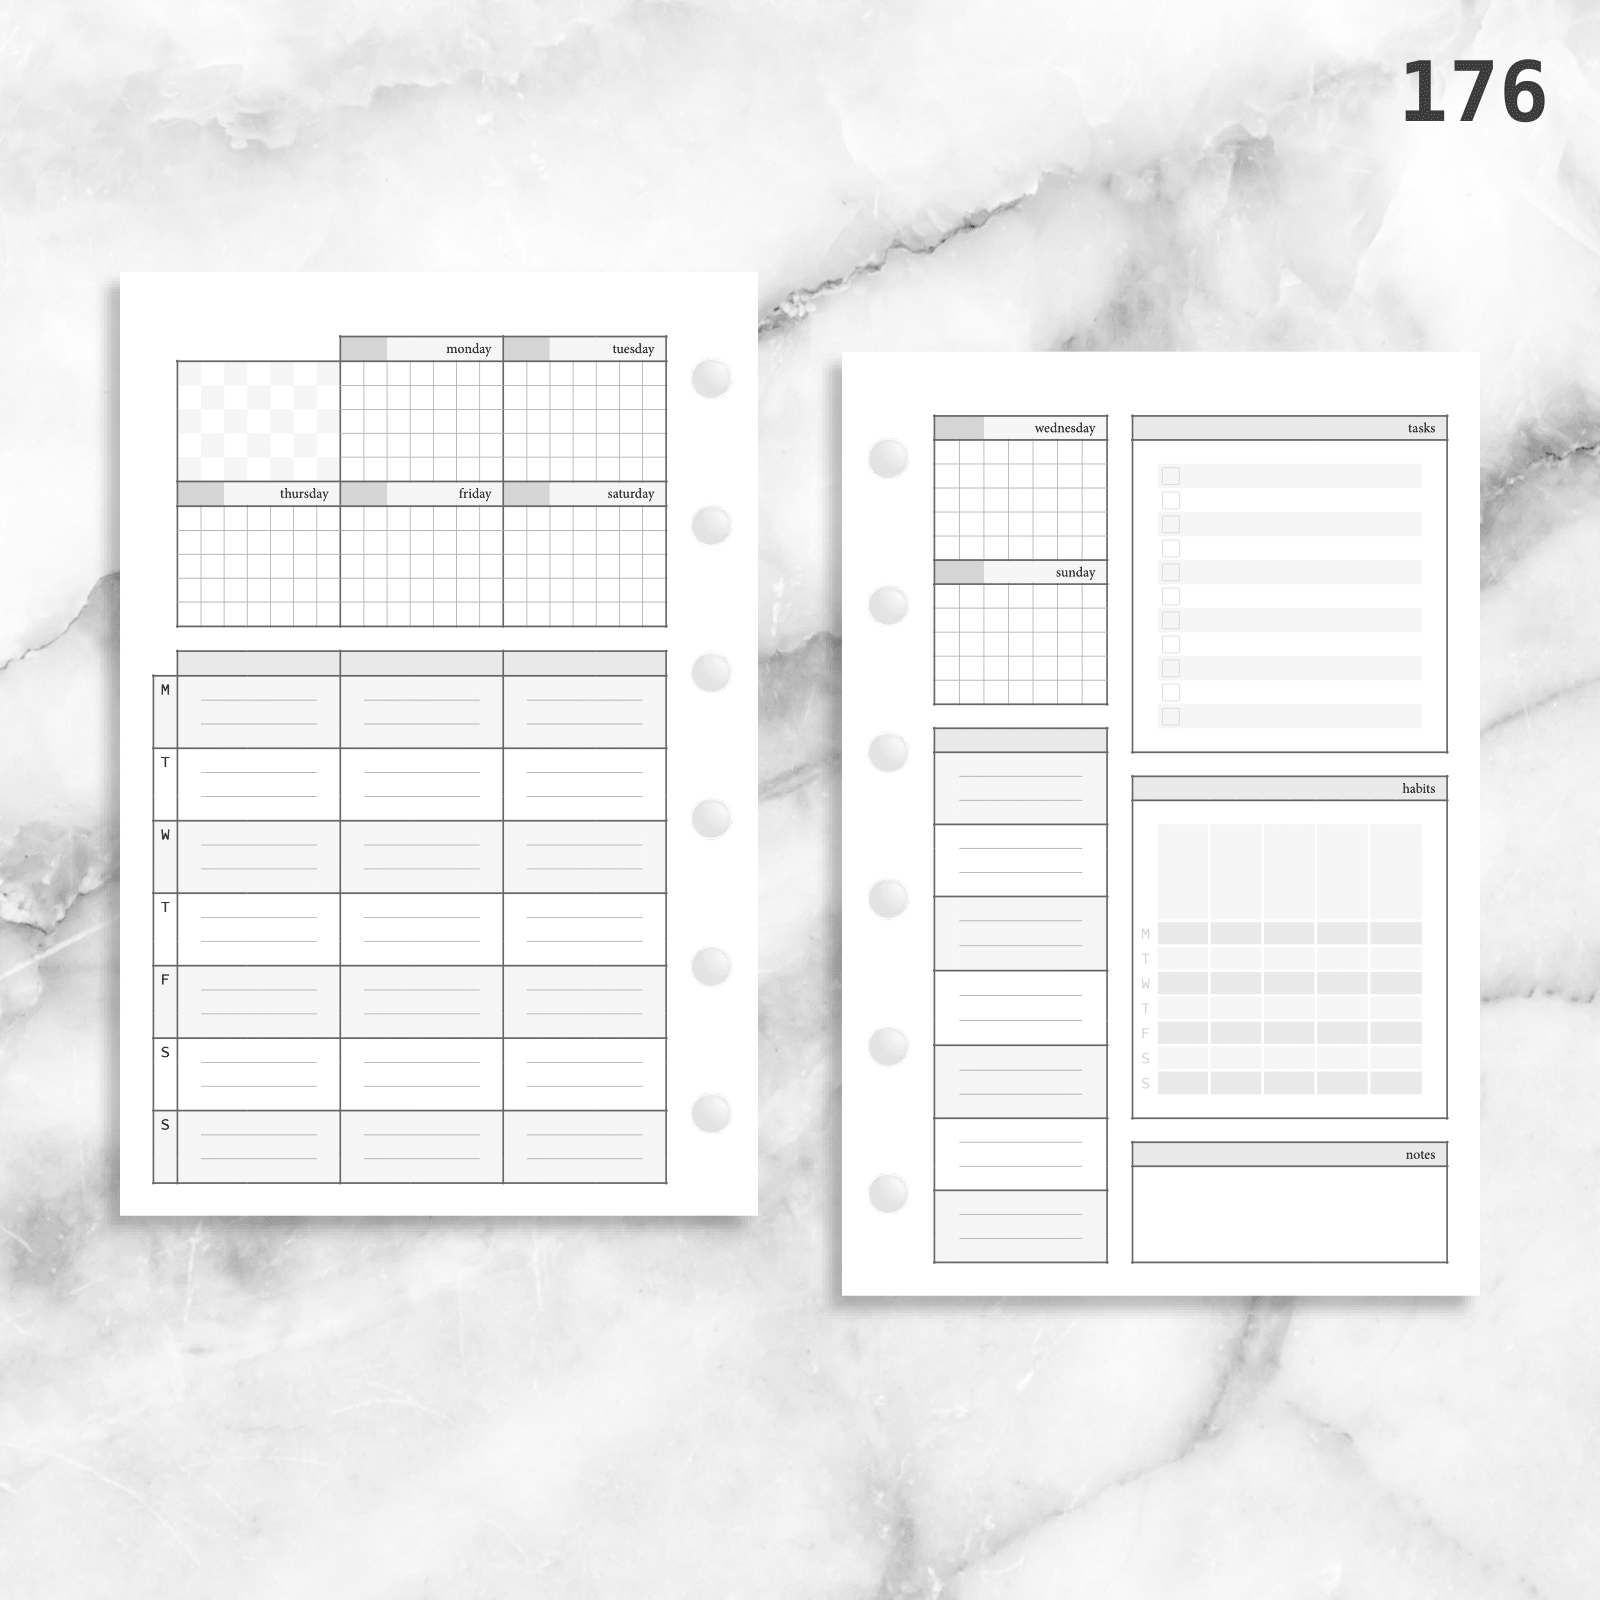 2024 WEEKLY Planner Insert Dated WO2P Horizontal Lined